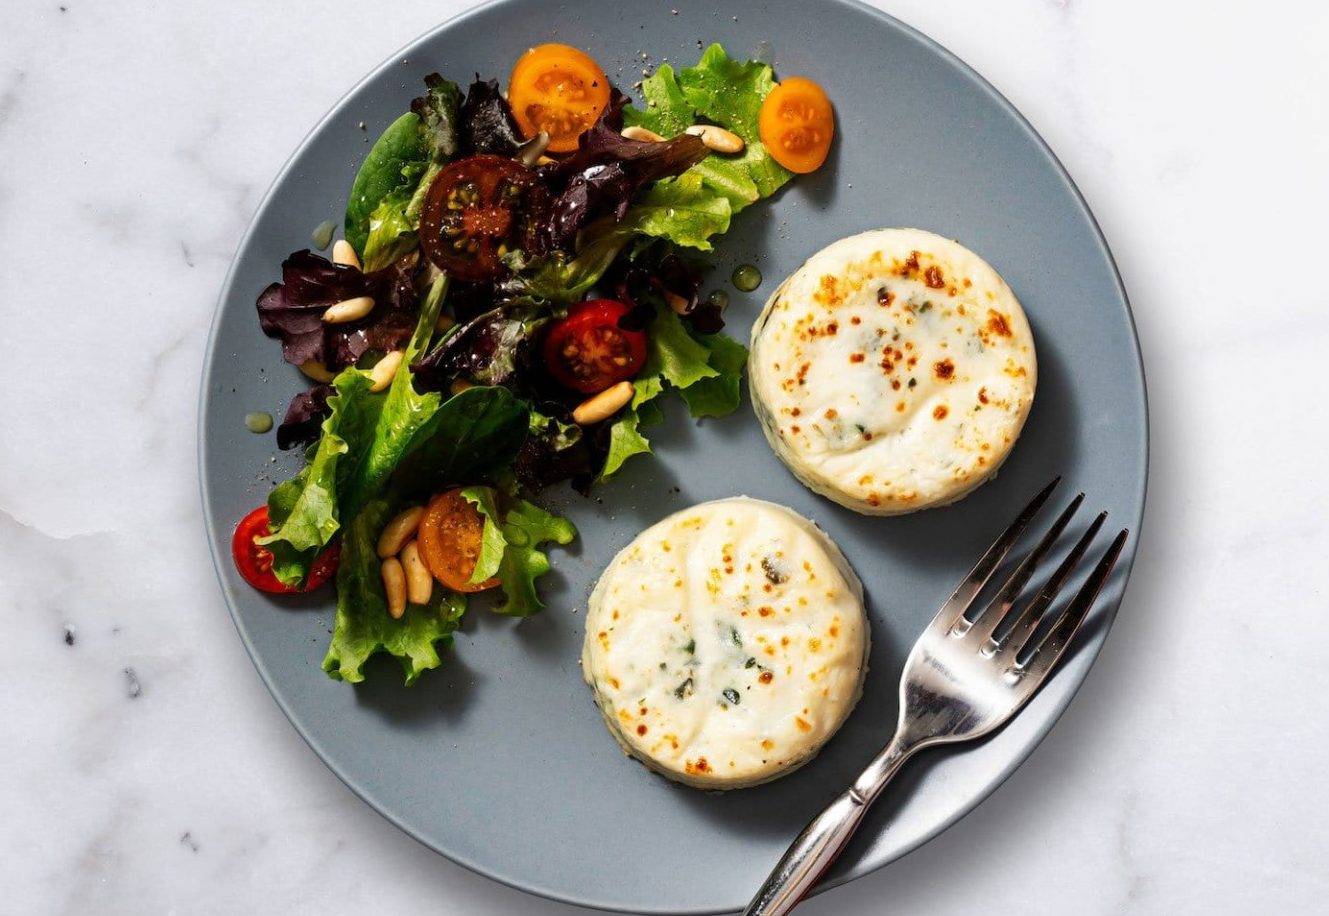 Egg white bite with spinach and kale salad